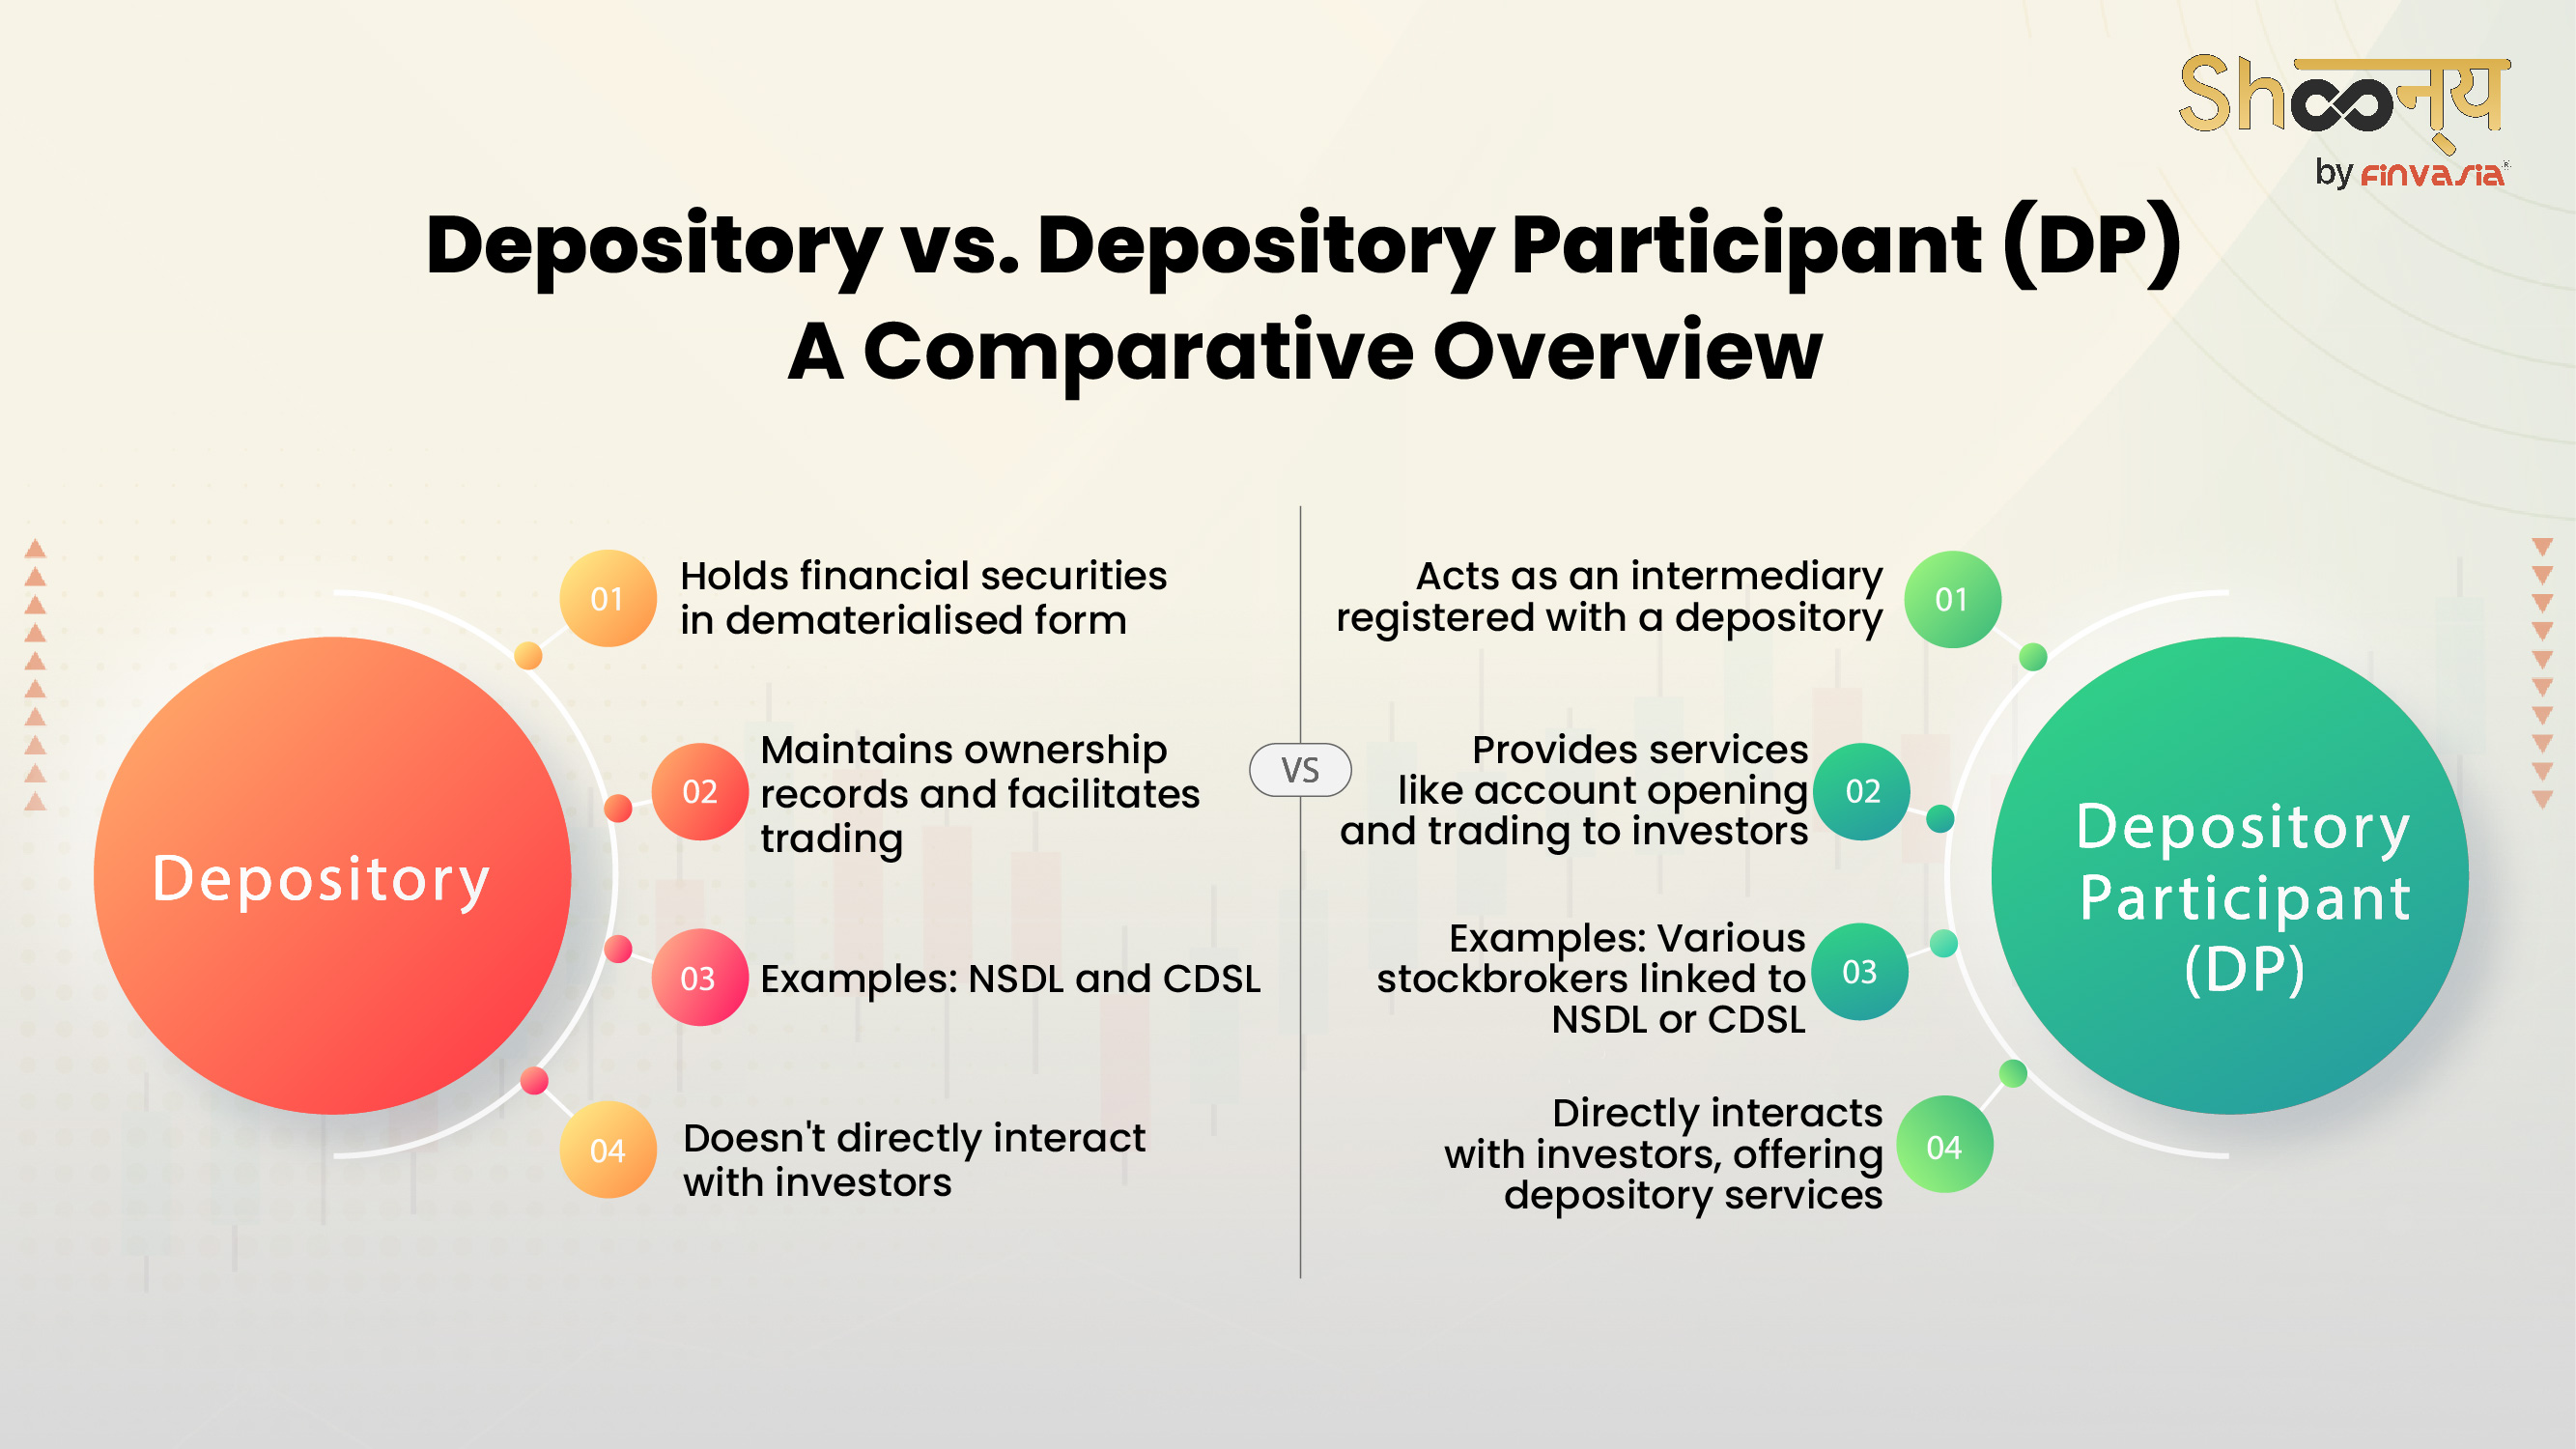 Depository vs. Depository Participant (DP): A Comparative Overview